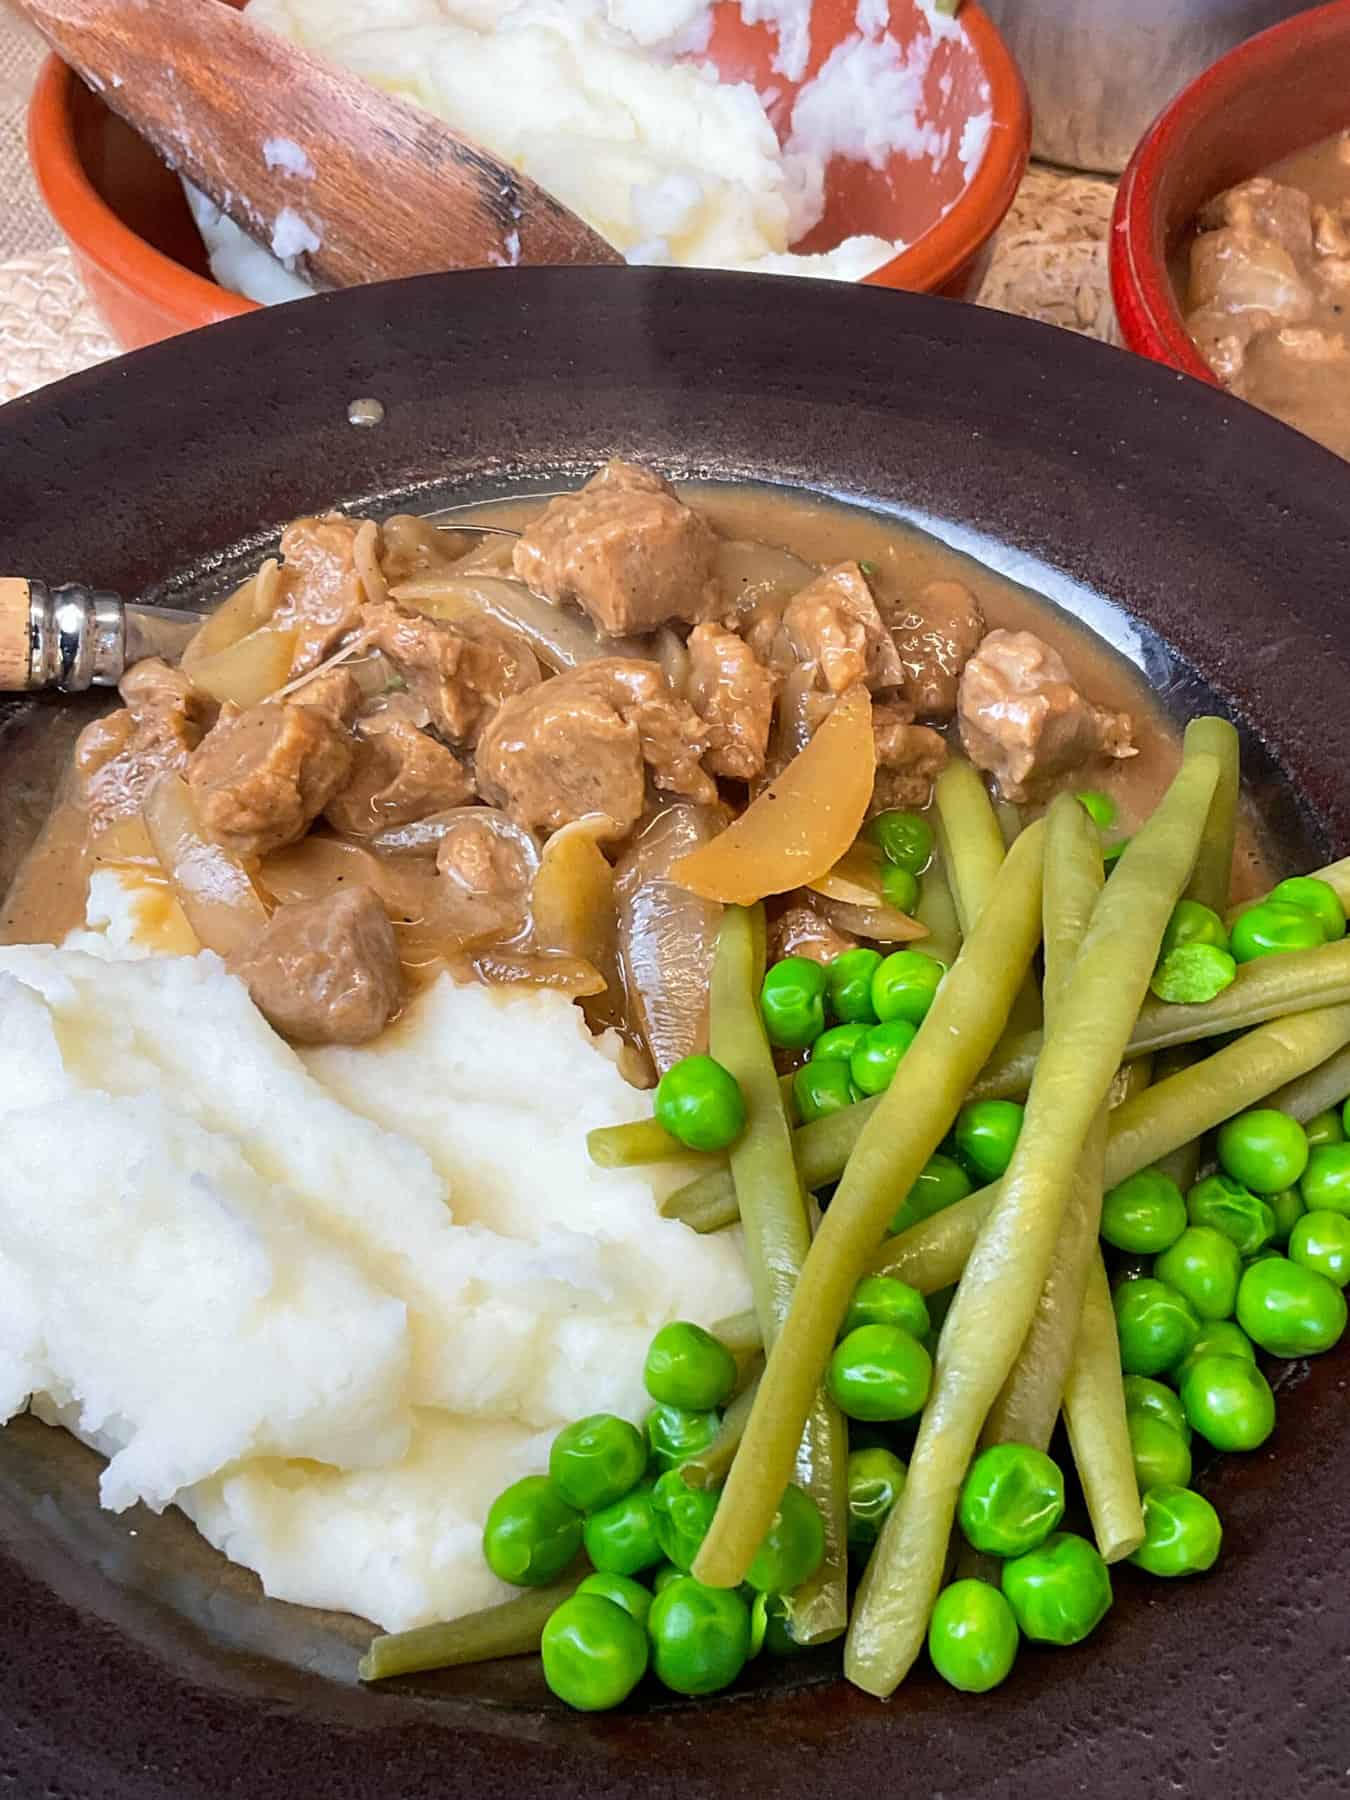 A close up of vegan Stroganoff in a brown bowl with mashed potatoes, green peas and beans to side, wooden handled spoon in bowl and a small bowl of mashed potatoes in background.